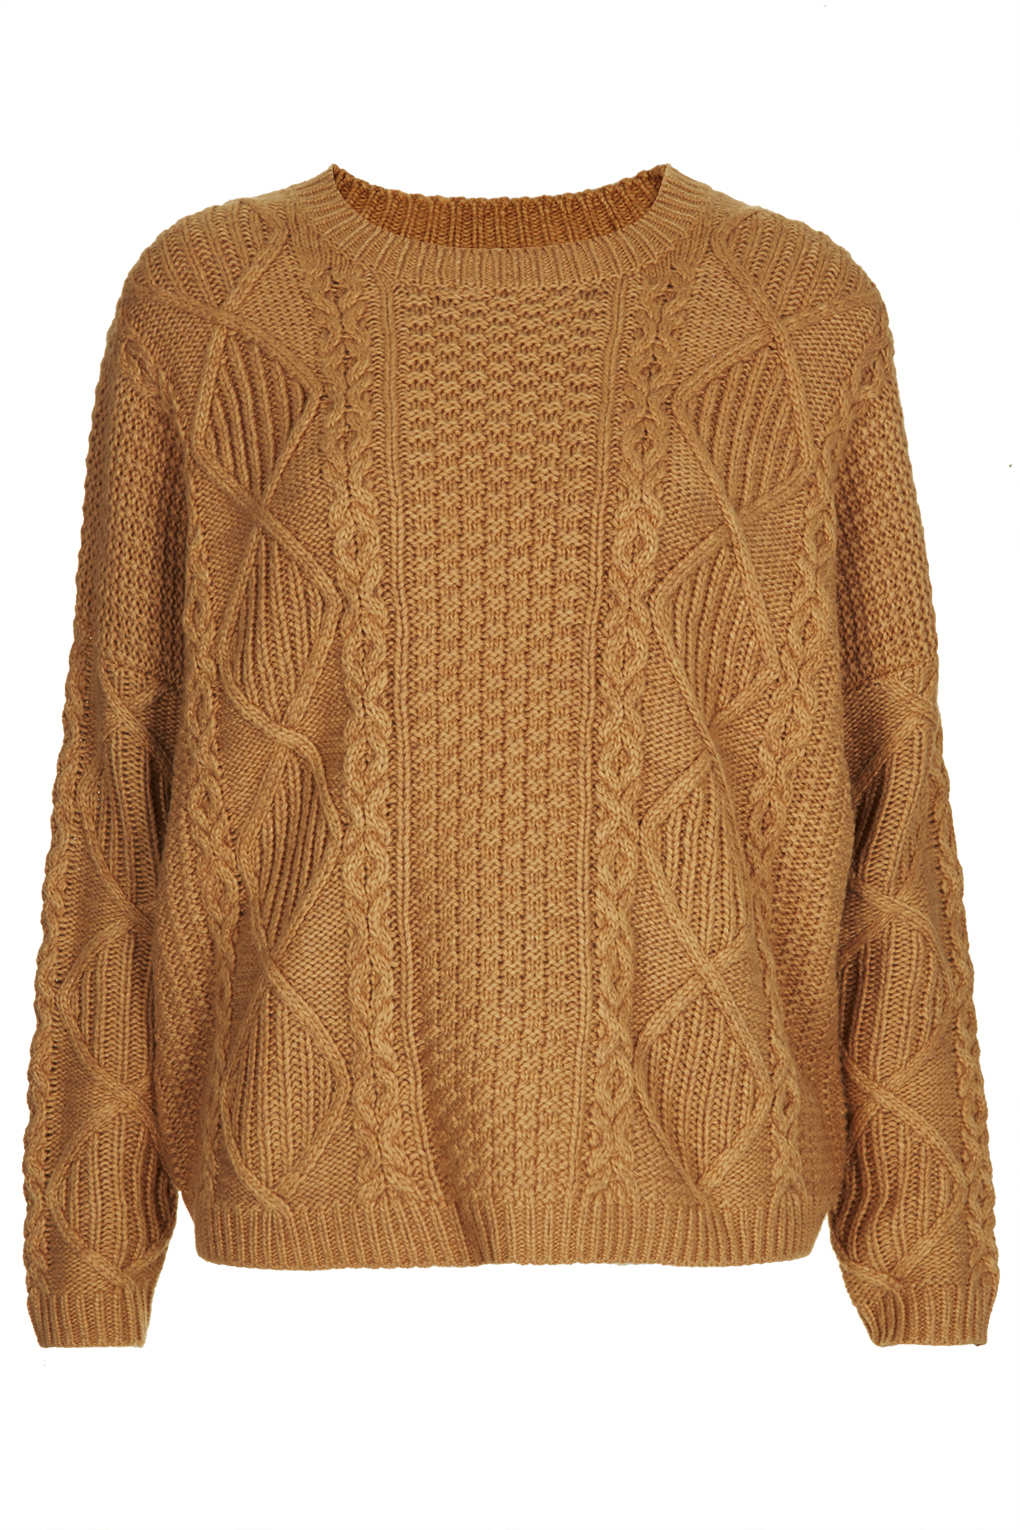 Lyst - Topshop Knitted Angora Cable Jumper